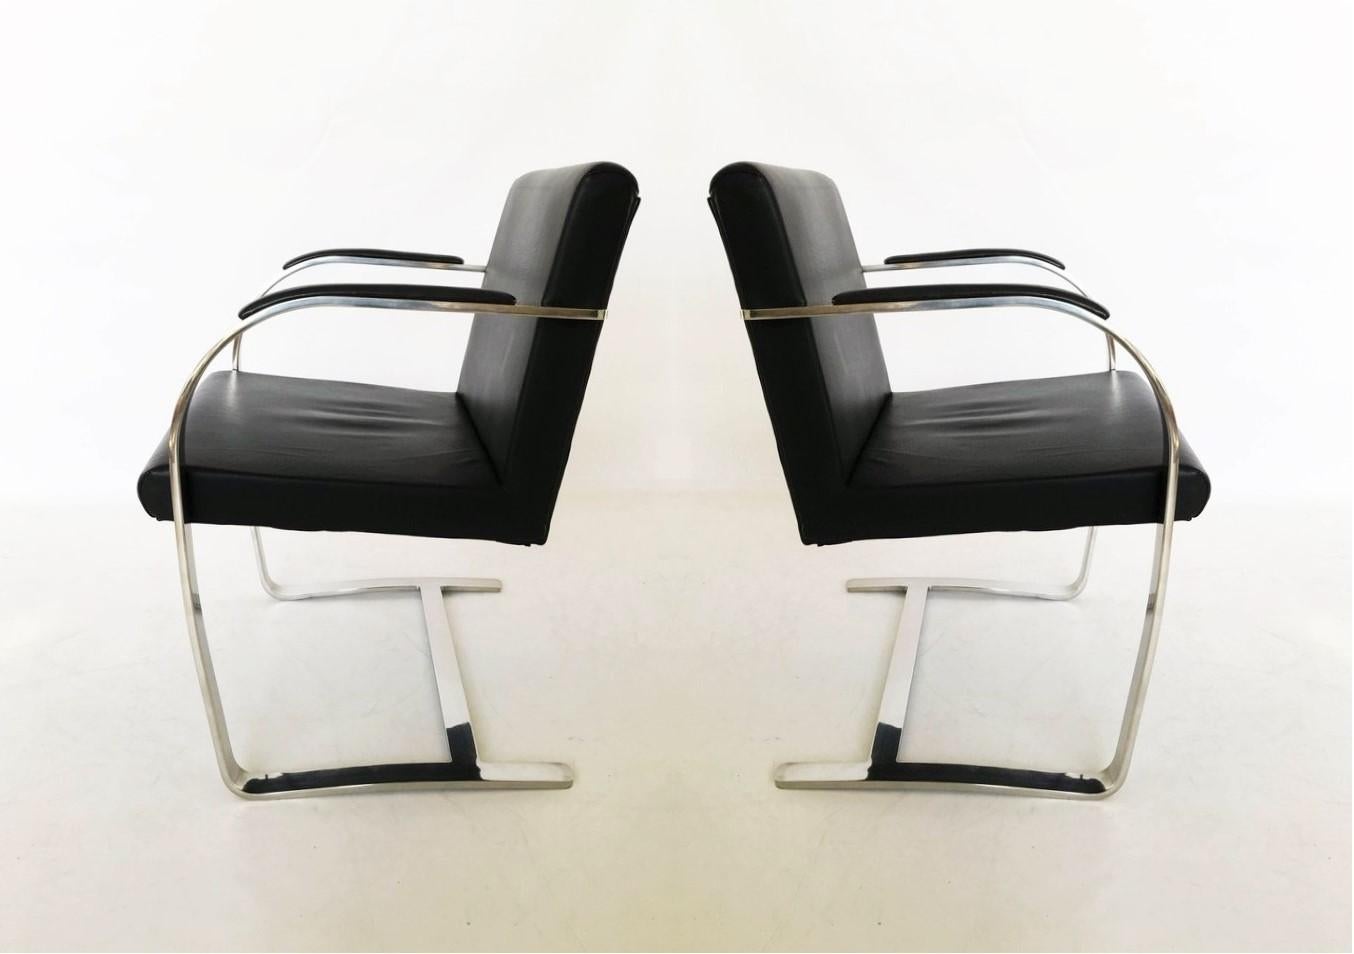 American Pair of Black Leather Ludwig Mies van der Rohe Flat Bar Brno Chairs